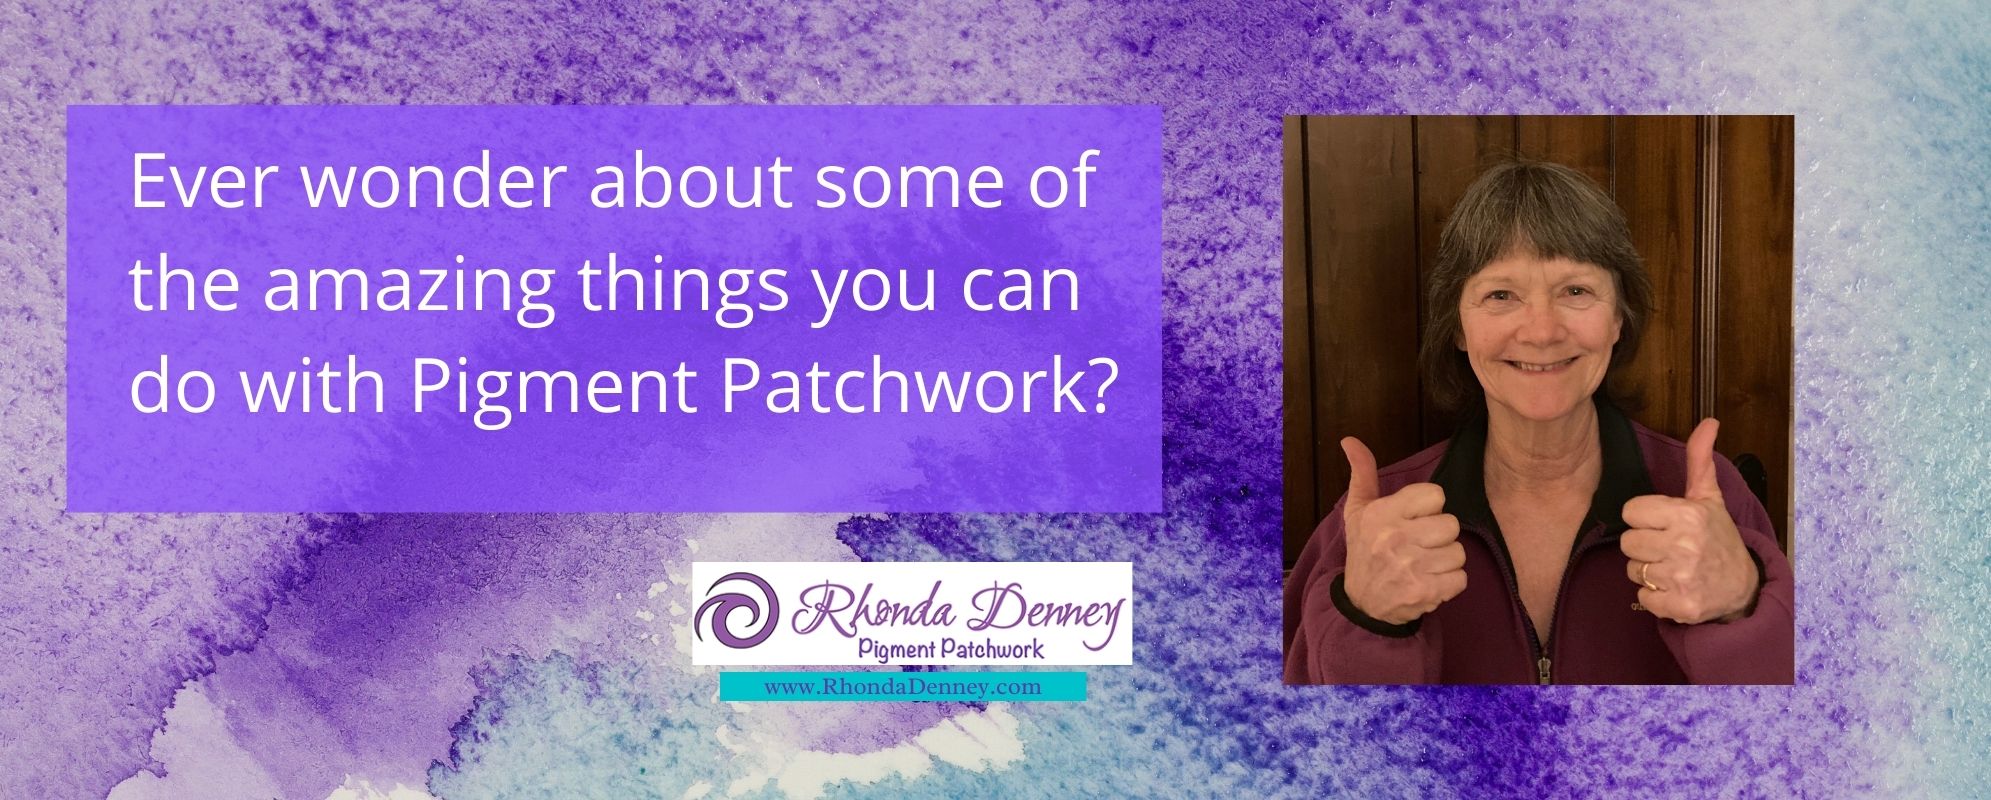 Rhonda Denney - Ever wonder about some of the amazing things you can do with Pigment Patchwork?